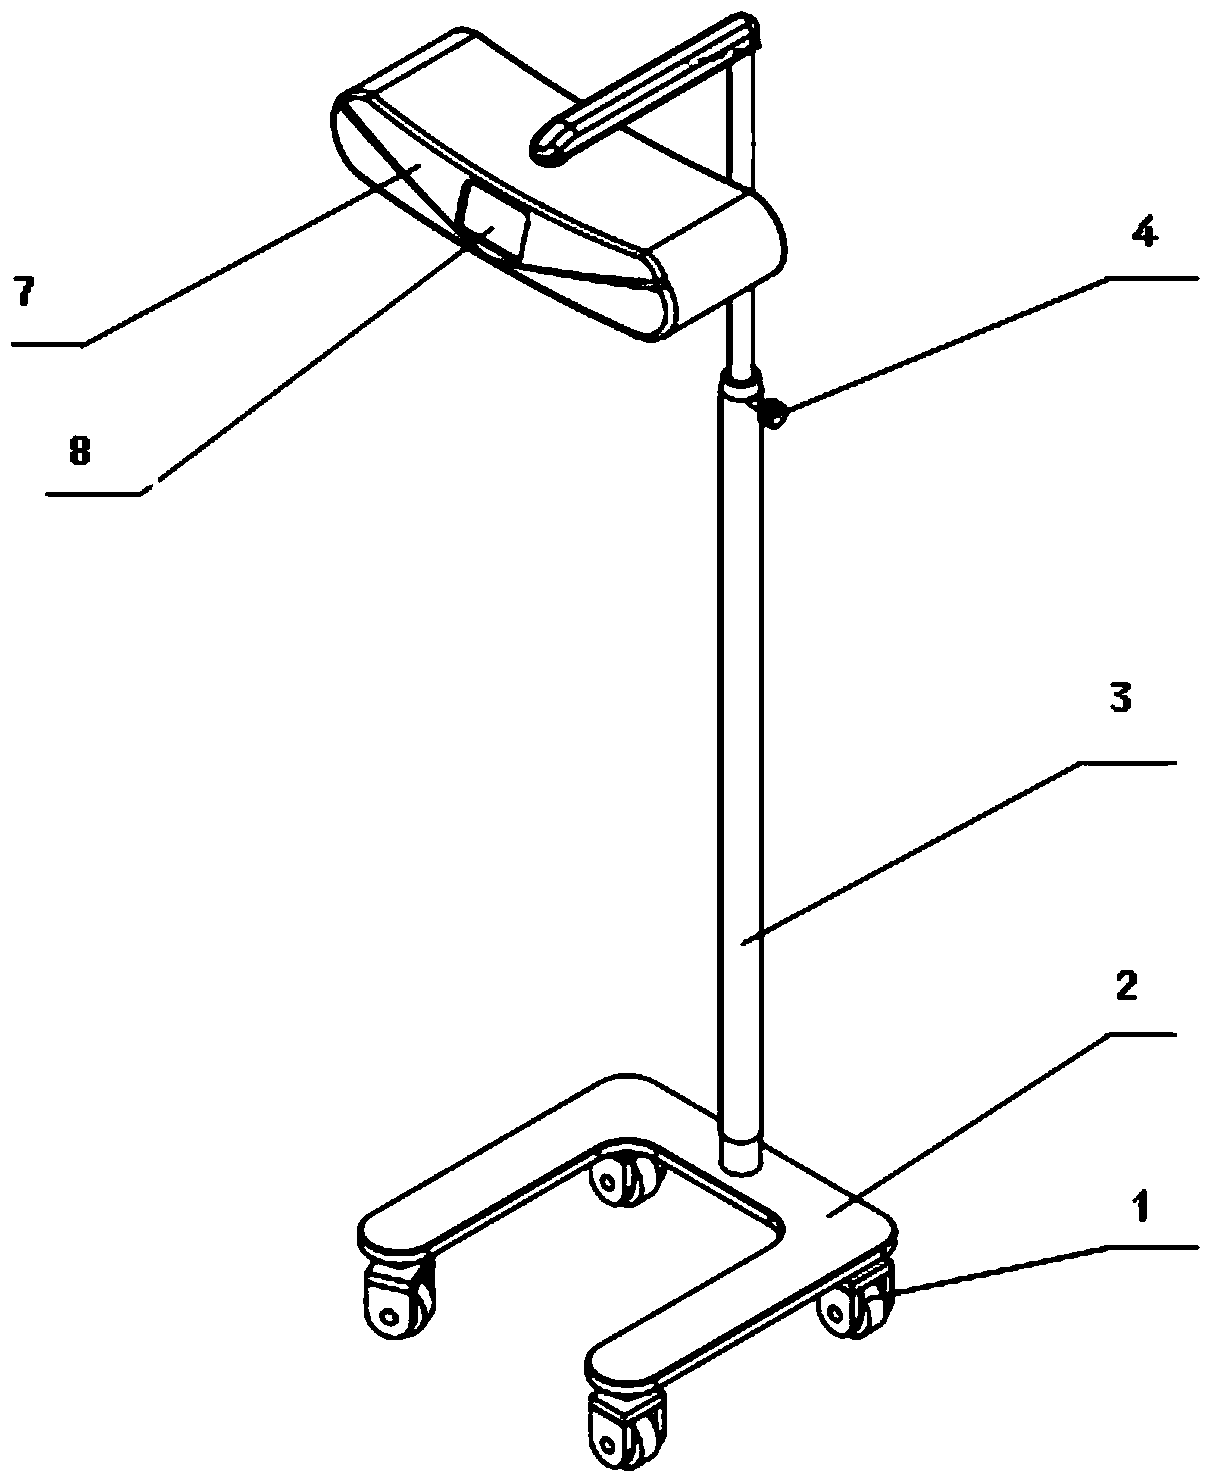 A treatment device for jaundice